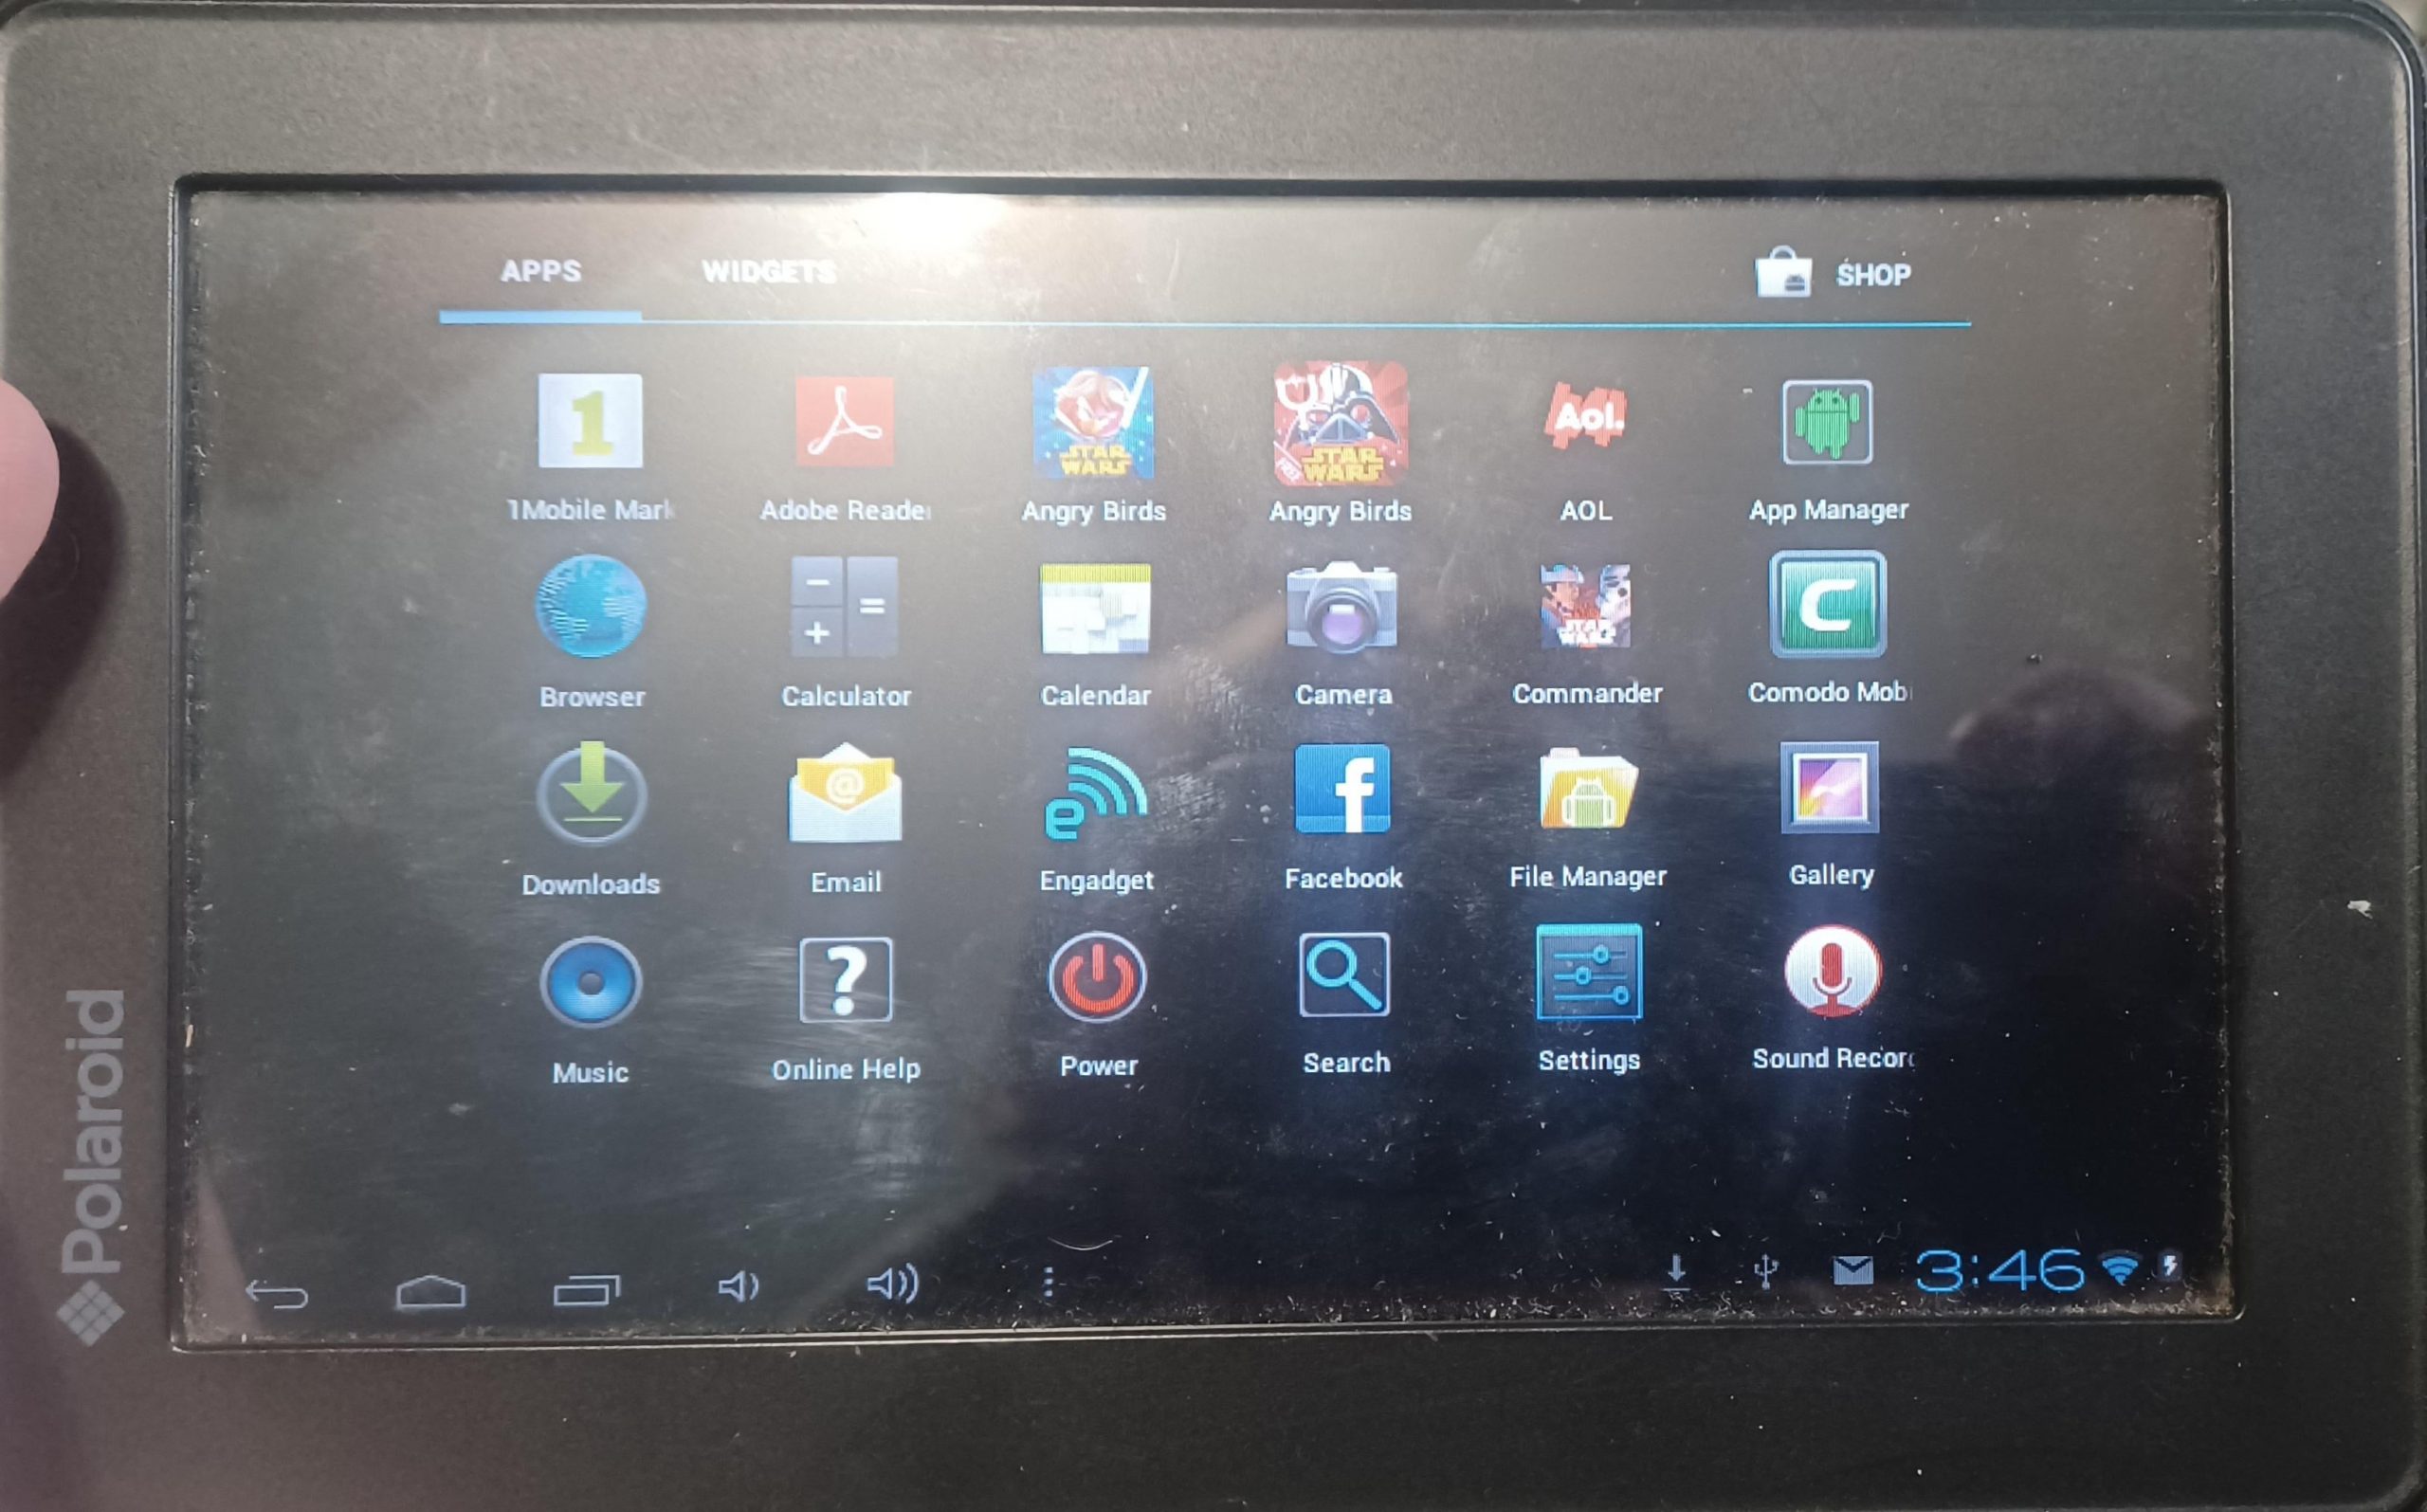 How Do I Install the Latest Version of Android on My Old Tablet